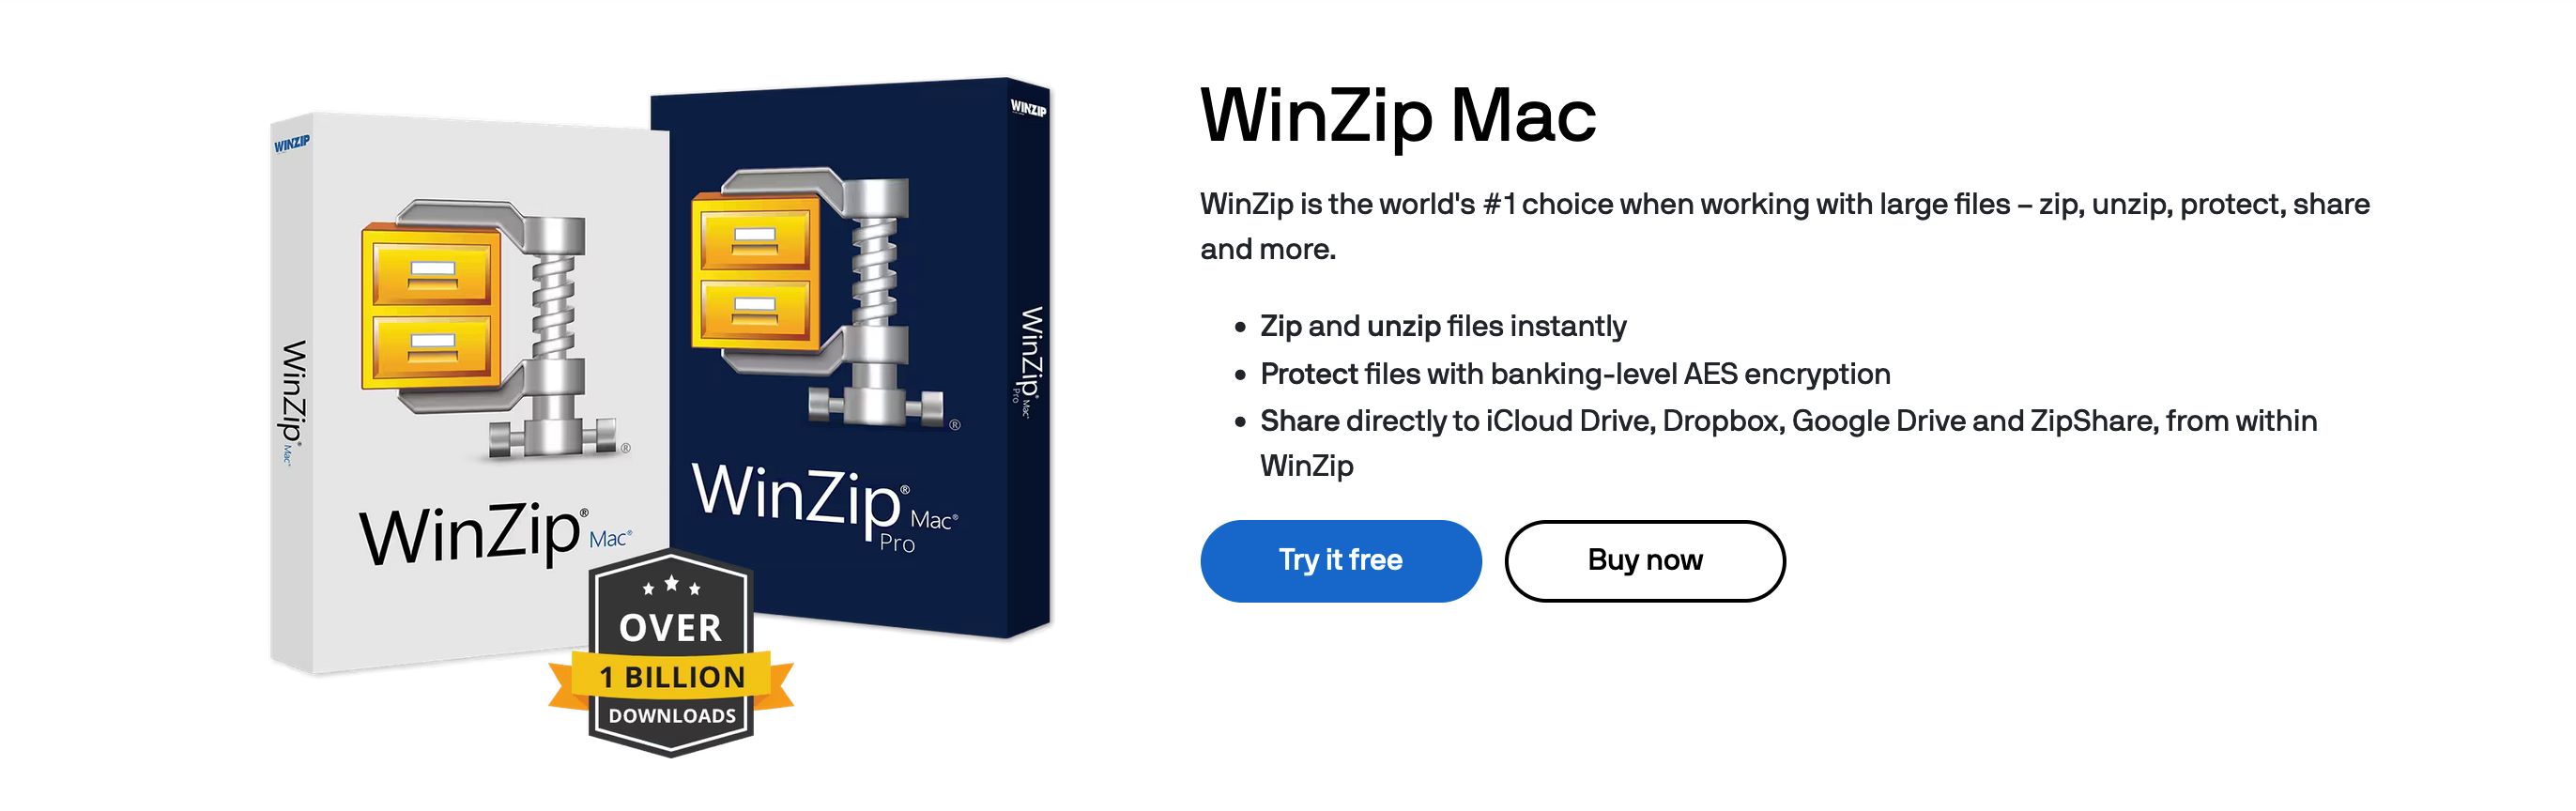 Official site of WinZip.